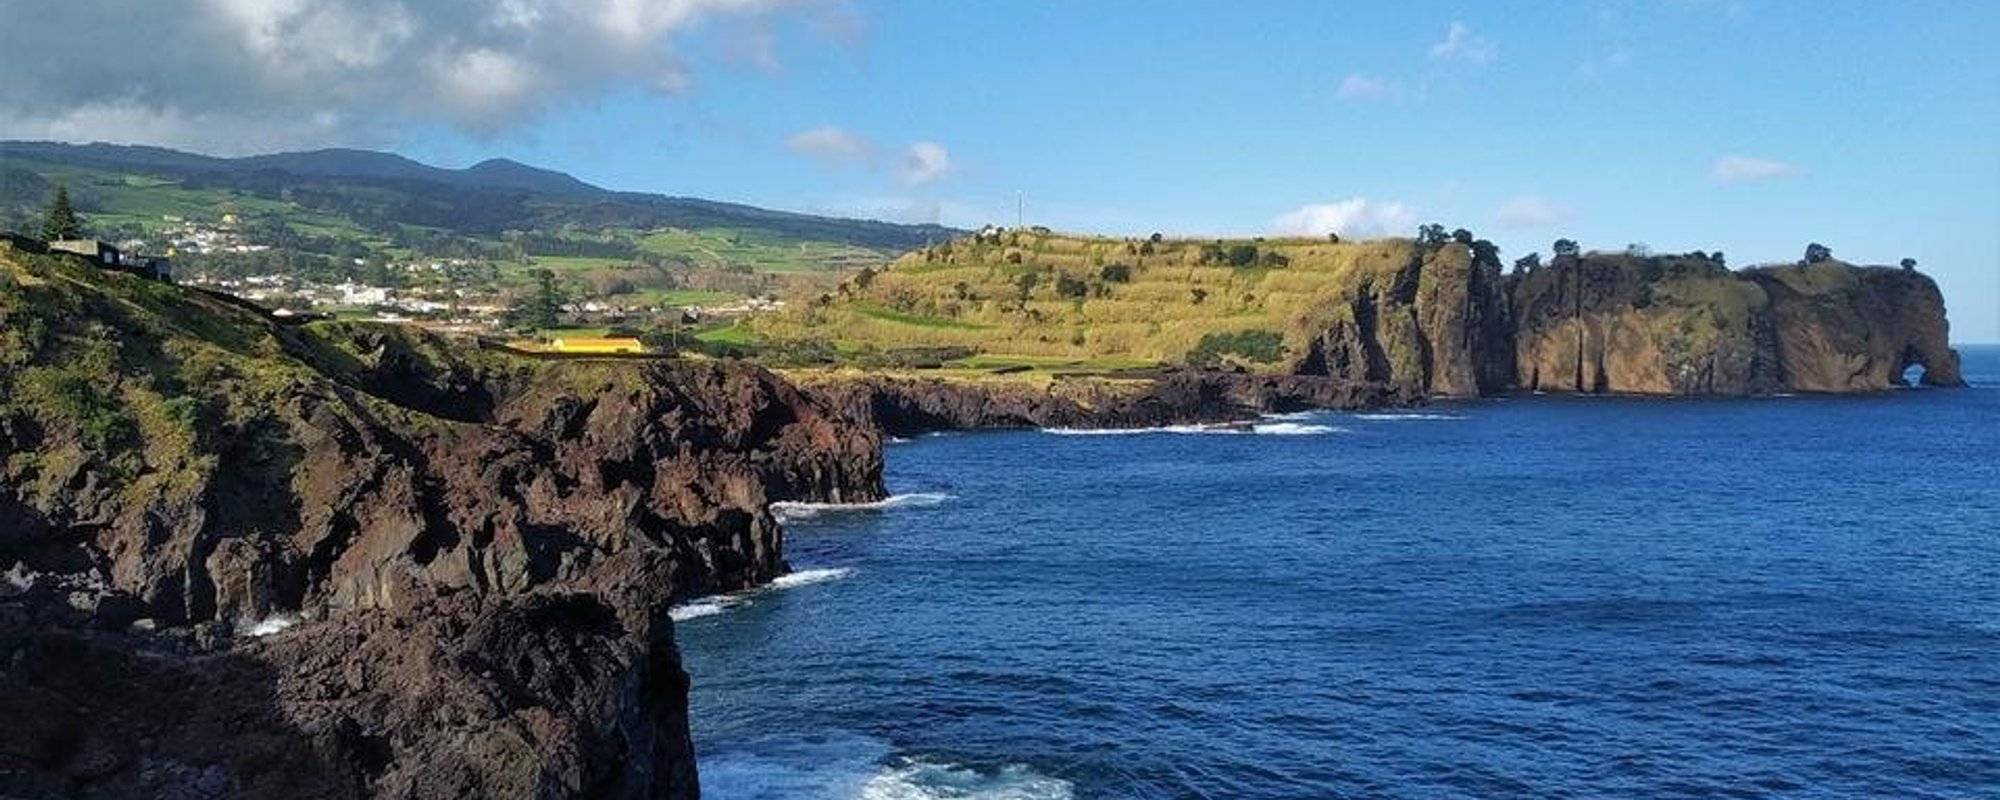 Beauties of Azores: Capelas, picturesque little town with bloody past